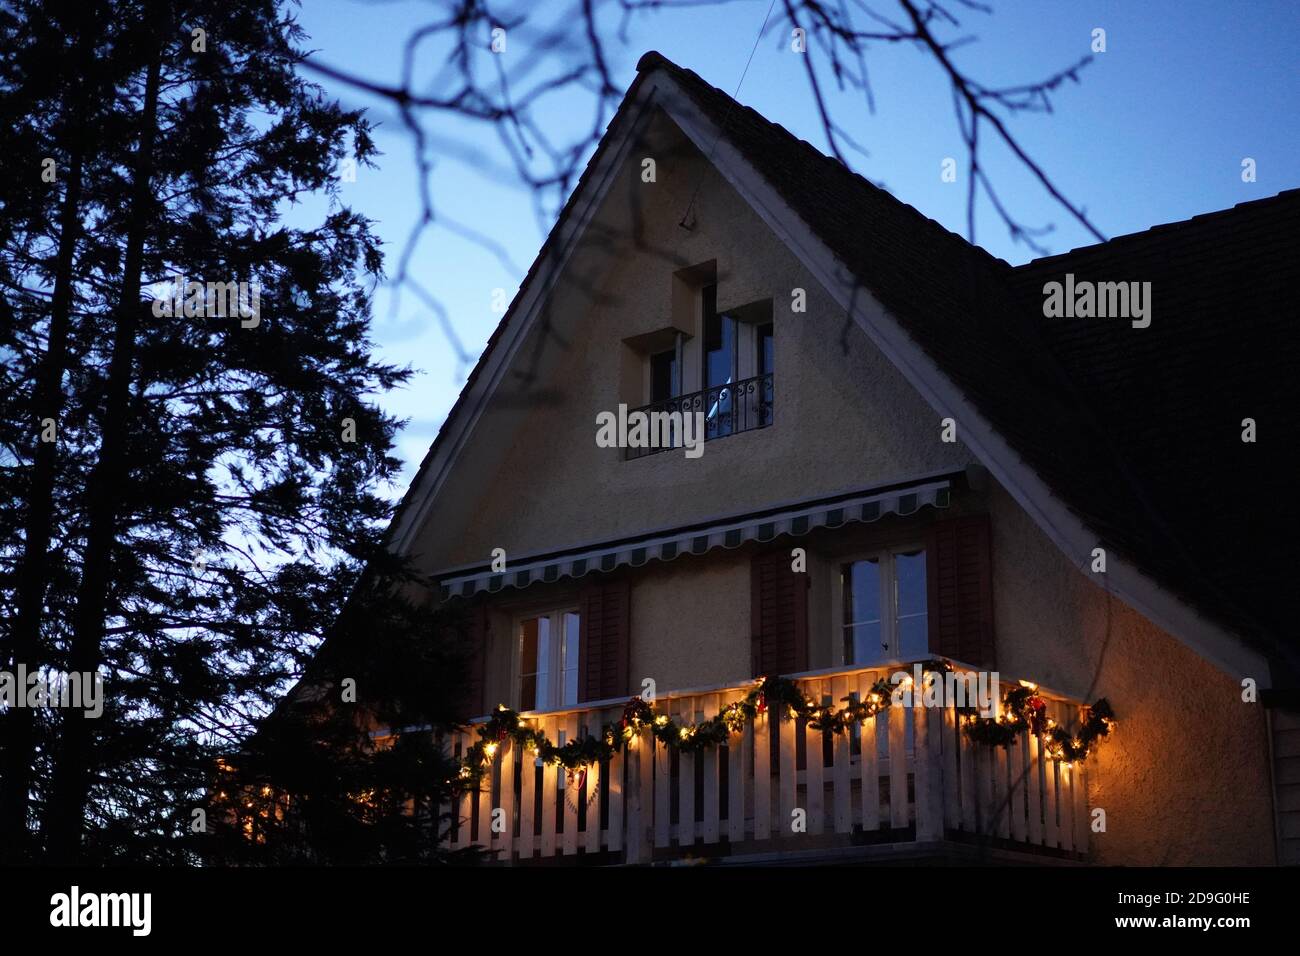 Christmas wreaths with candle lights on wooden balcony in the dusk at Christmastime. Tree at left side with space in the middle. Low angle view. Stock Photo